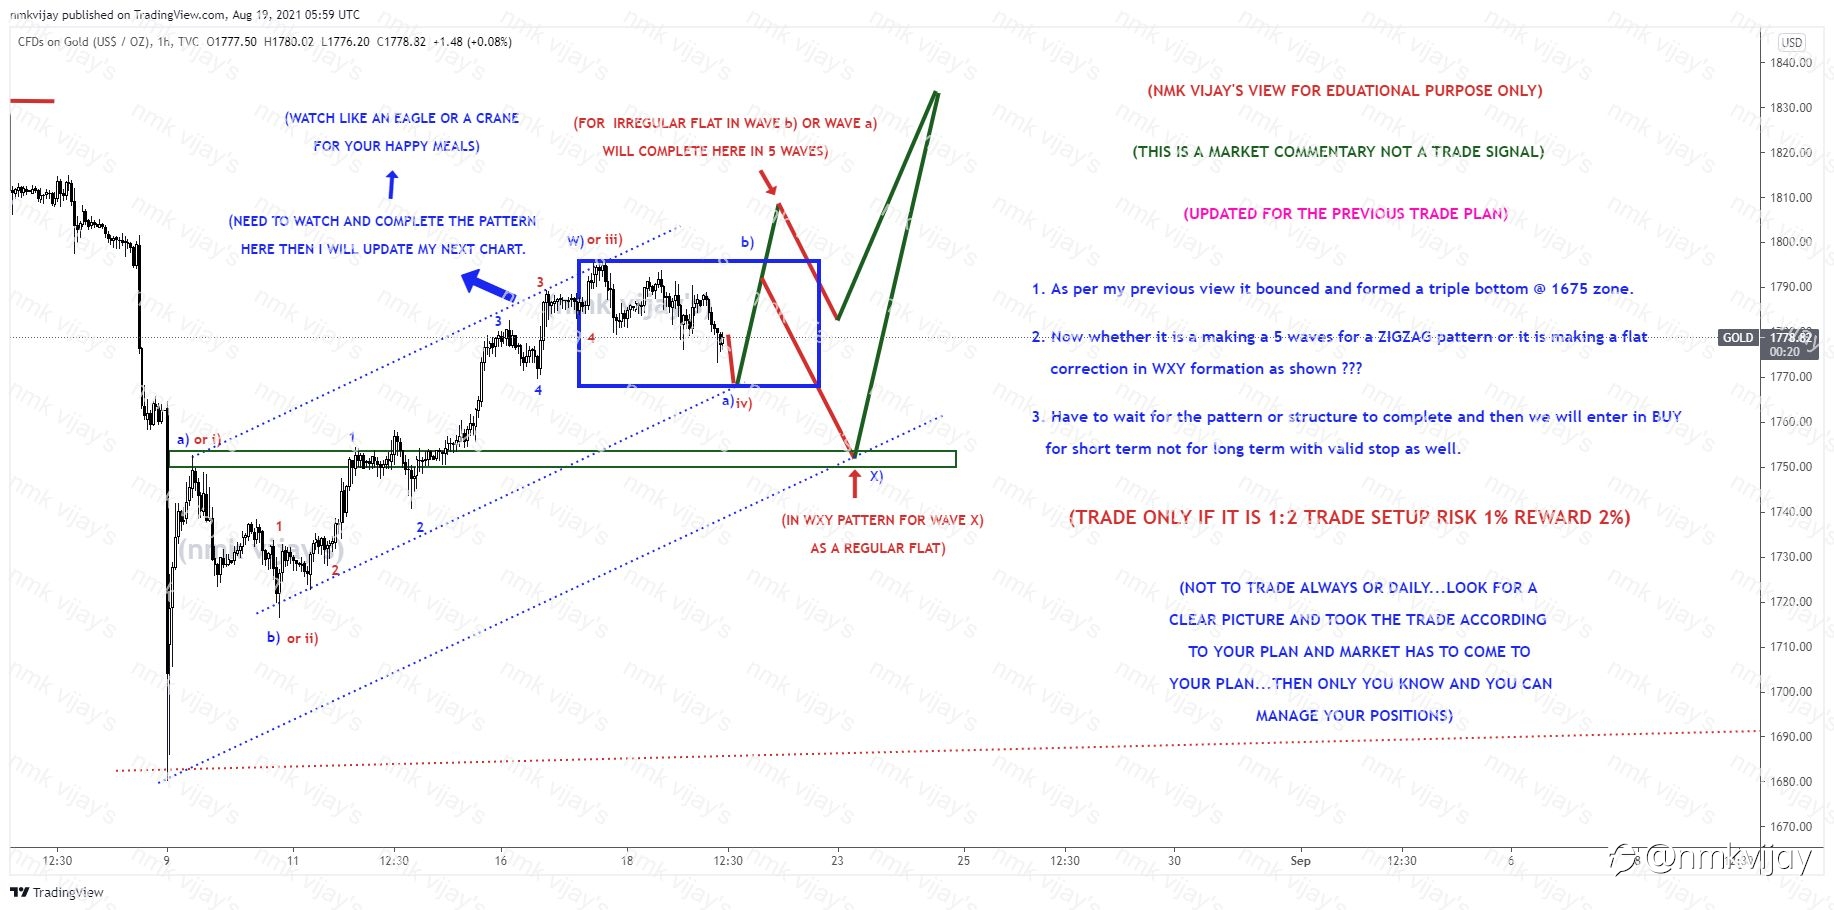 GOLD-Will make 5 waves or WXY pattern ?